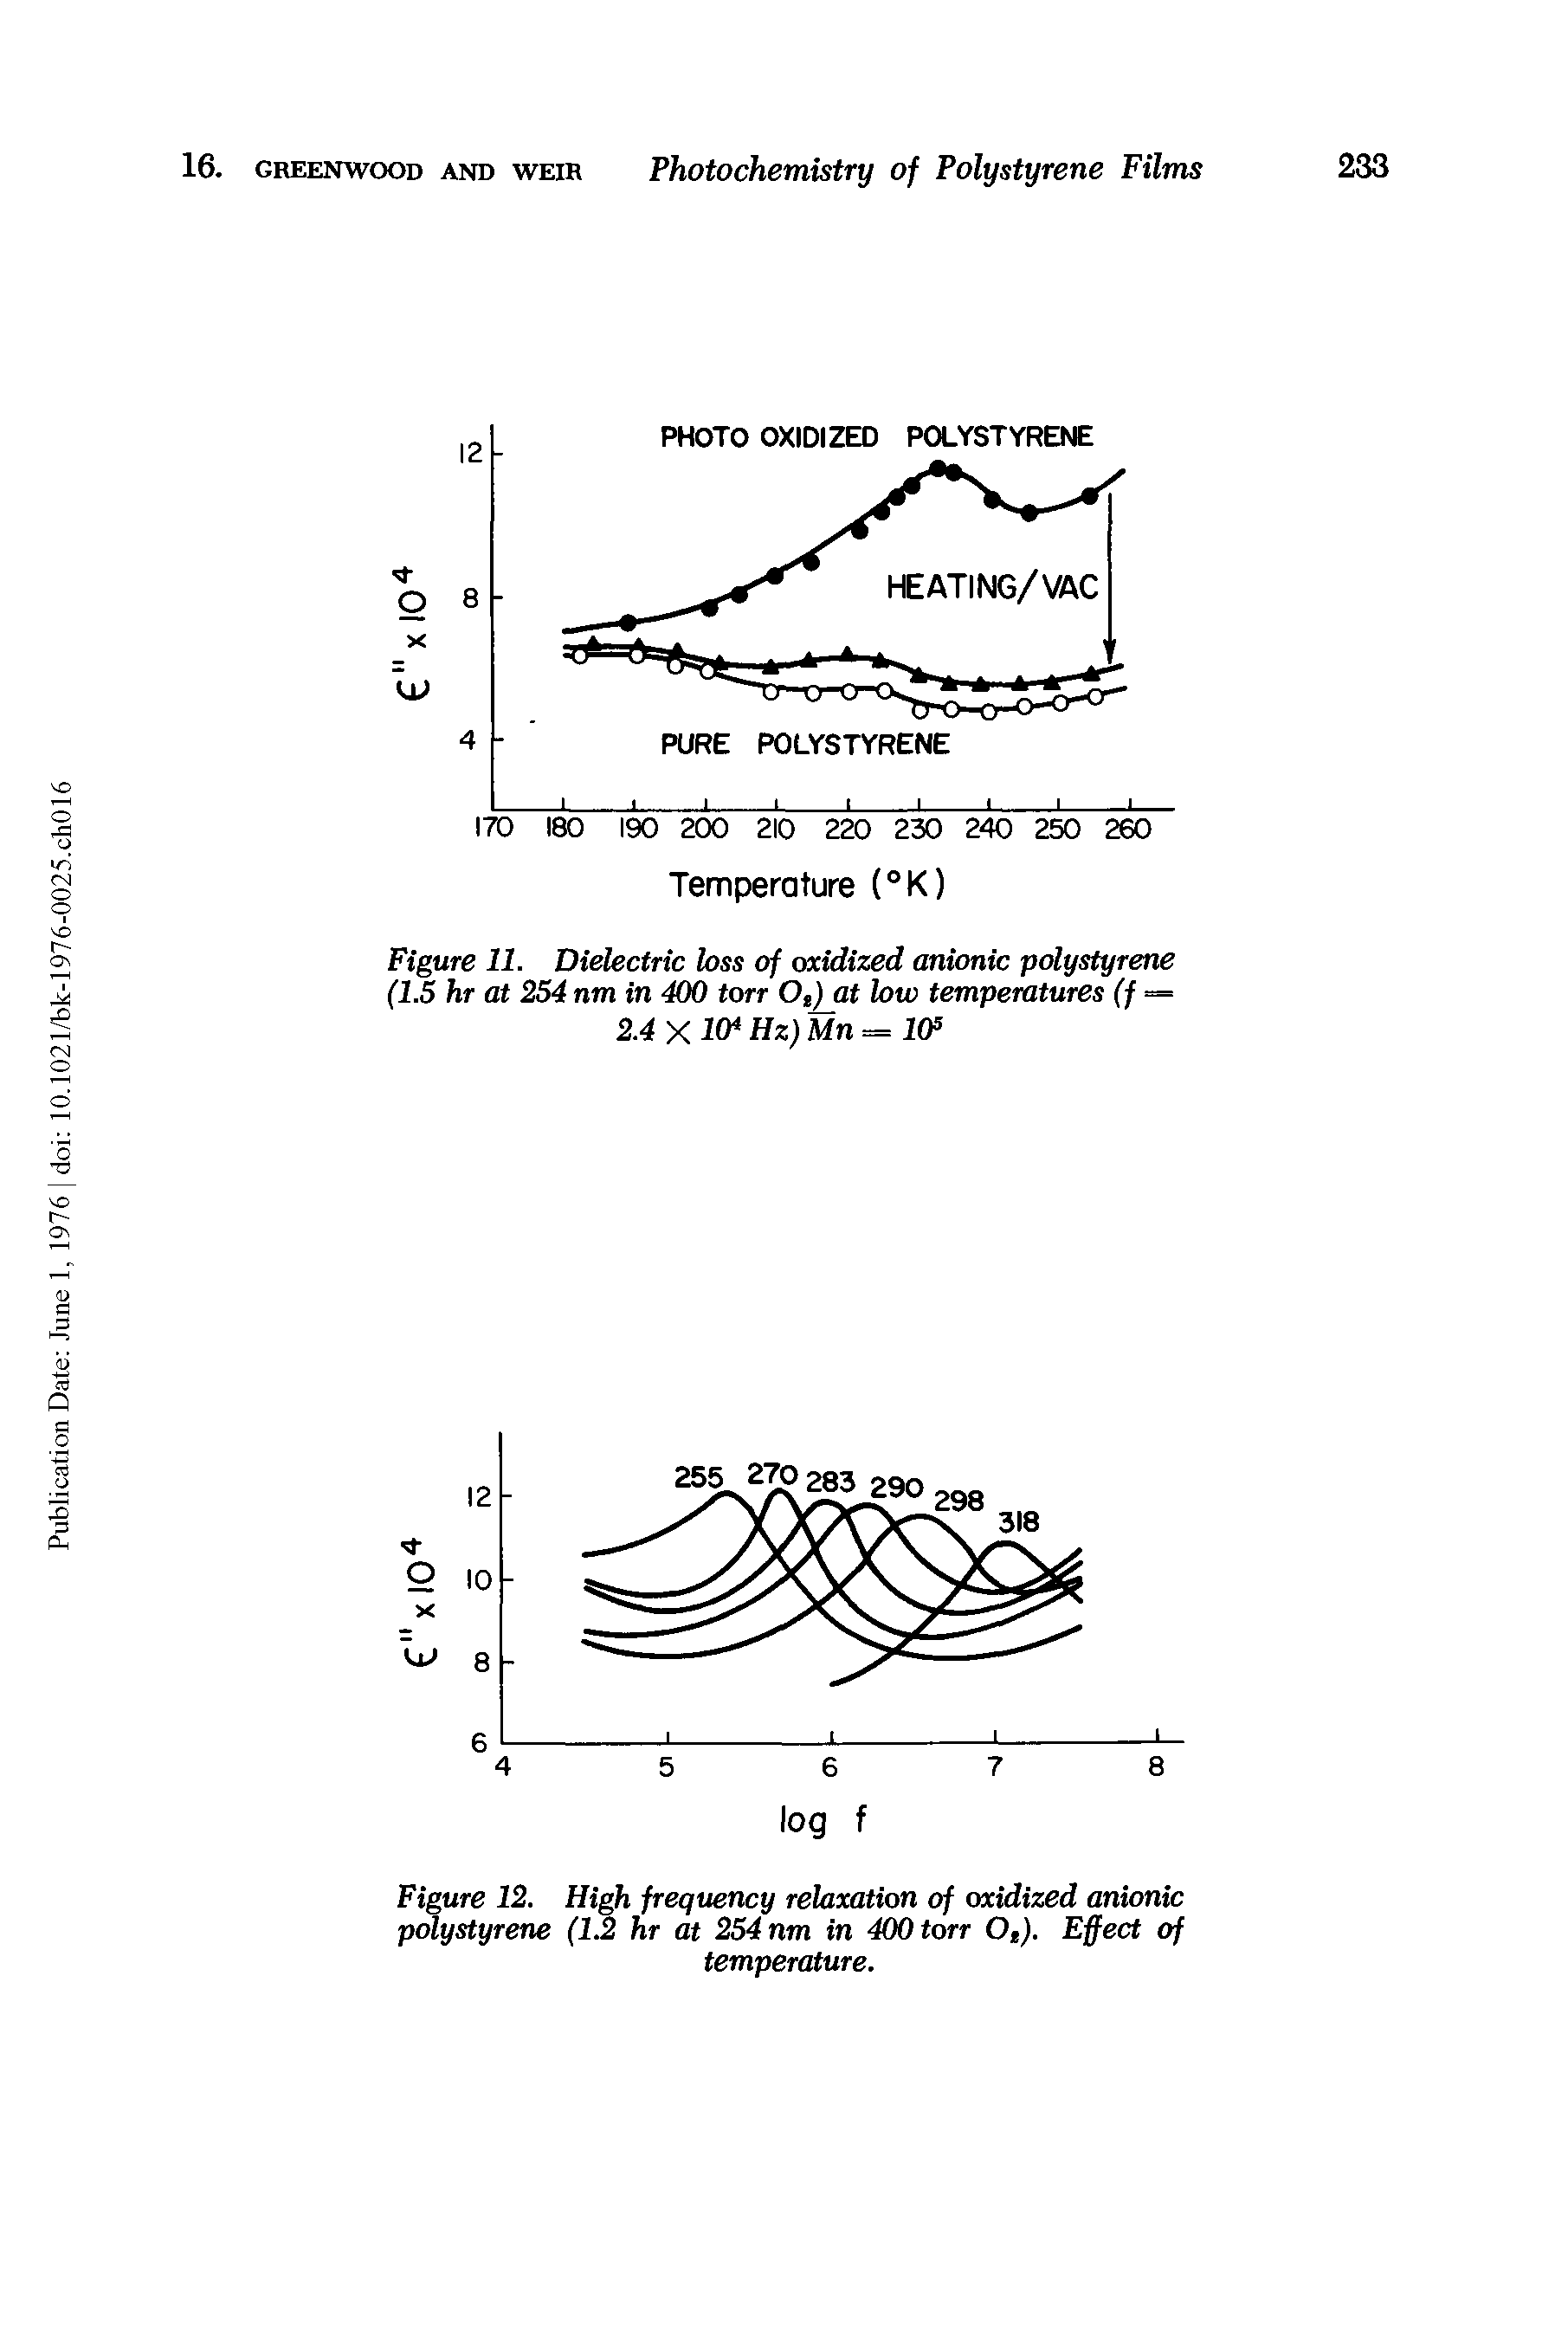 Figure 12. High frequency relaxation of oxidized anionic p ystyrene (1 hr at 254 nm in 400 torr 0 j. Effect of temperature.